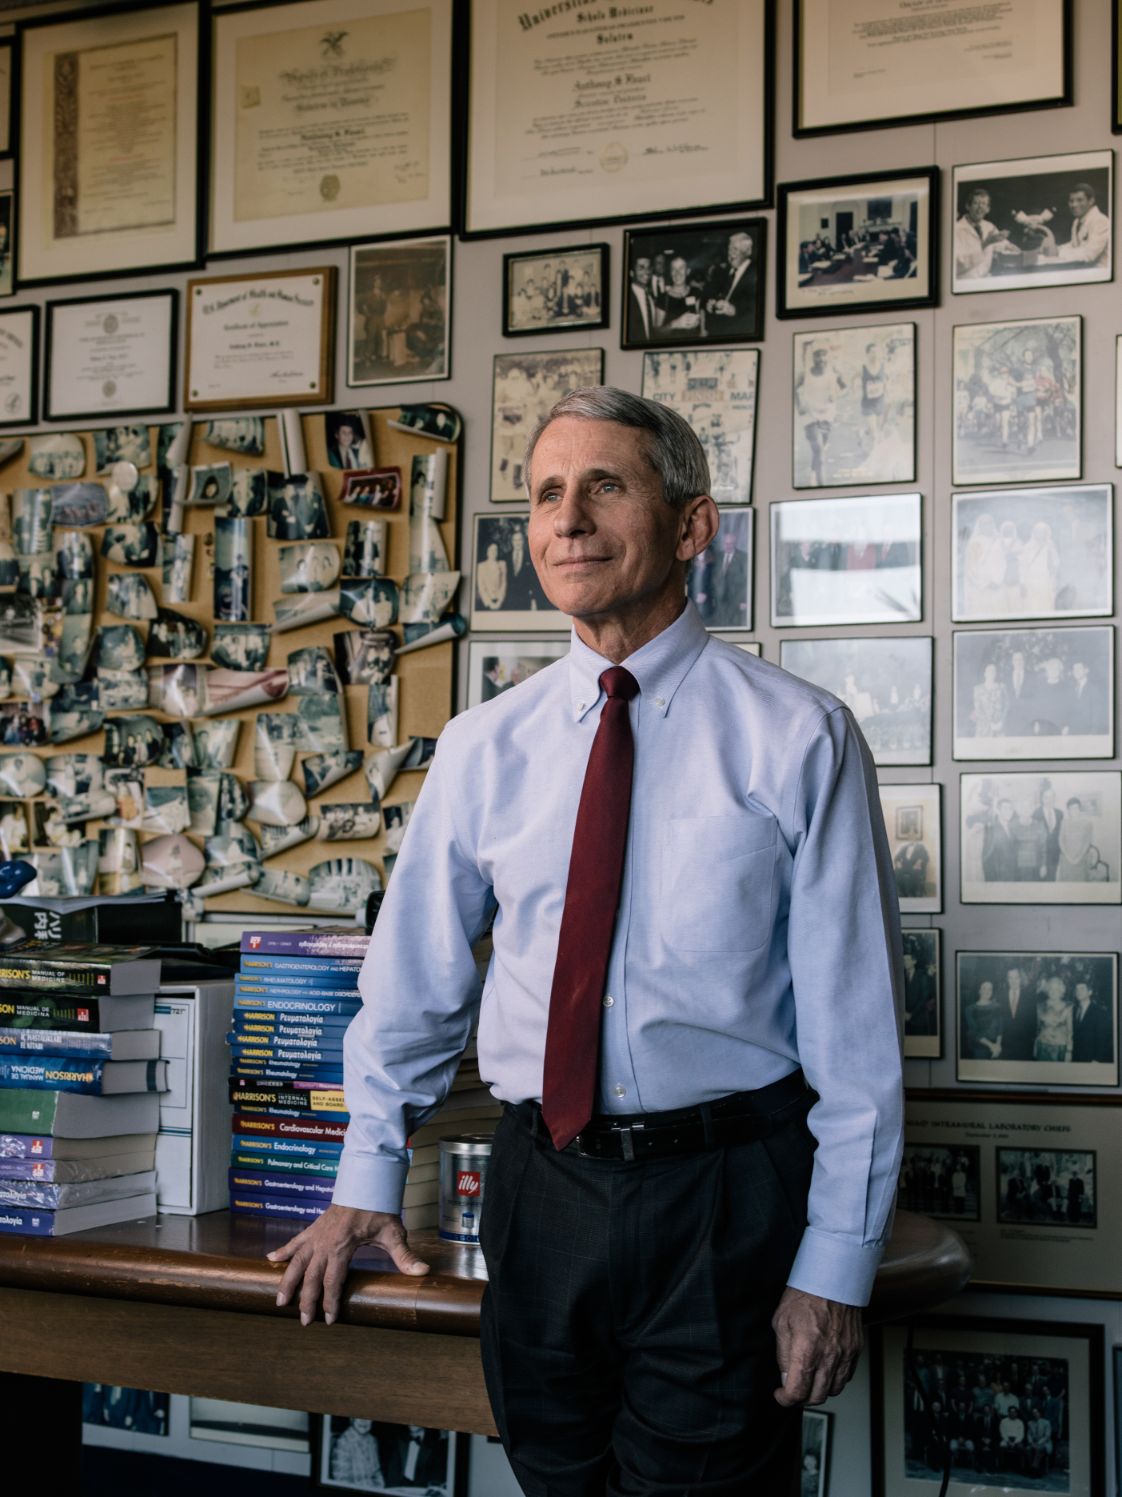 Anthony Fauci. Photograph by Greg Kahn